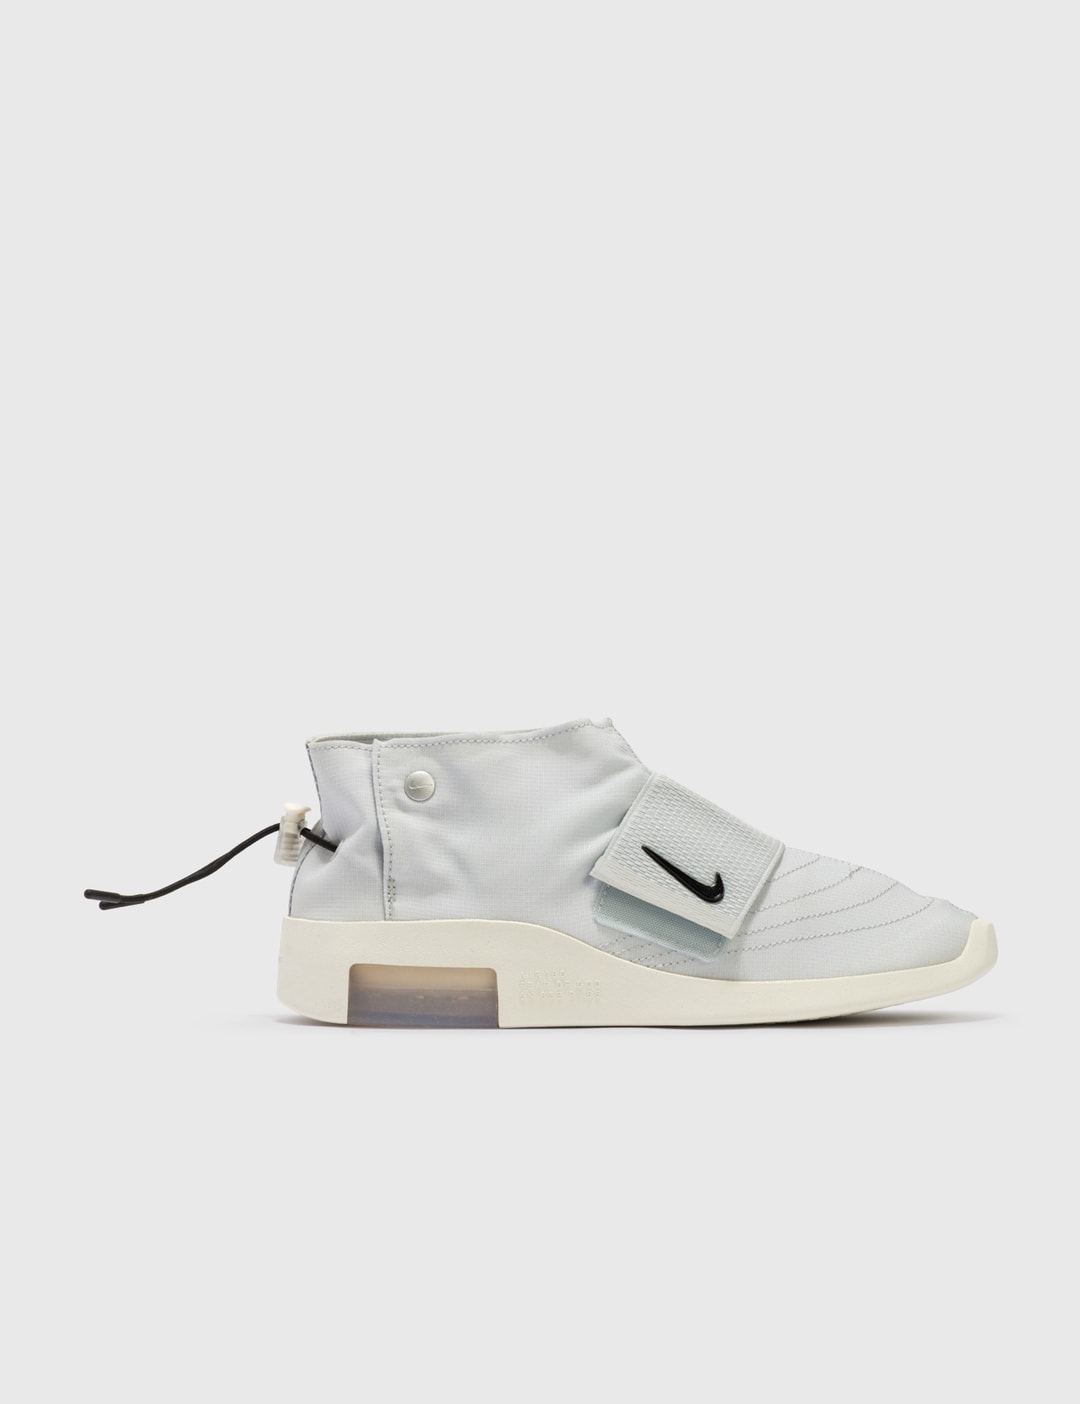 Medical malpractice Backward Indirect Nike - Nike Air X Fear Of God Moc | HBX - Globally Curated Fashion and  Lifestyle by Hypebeast